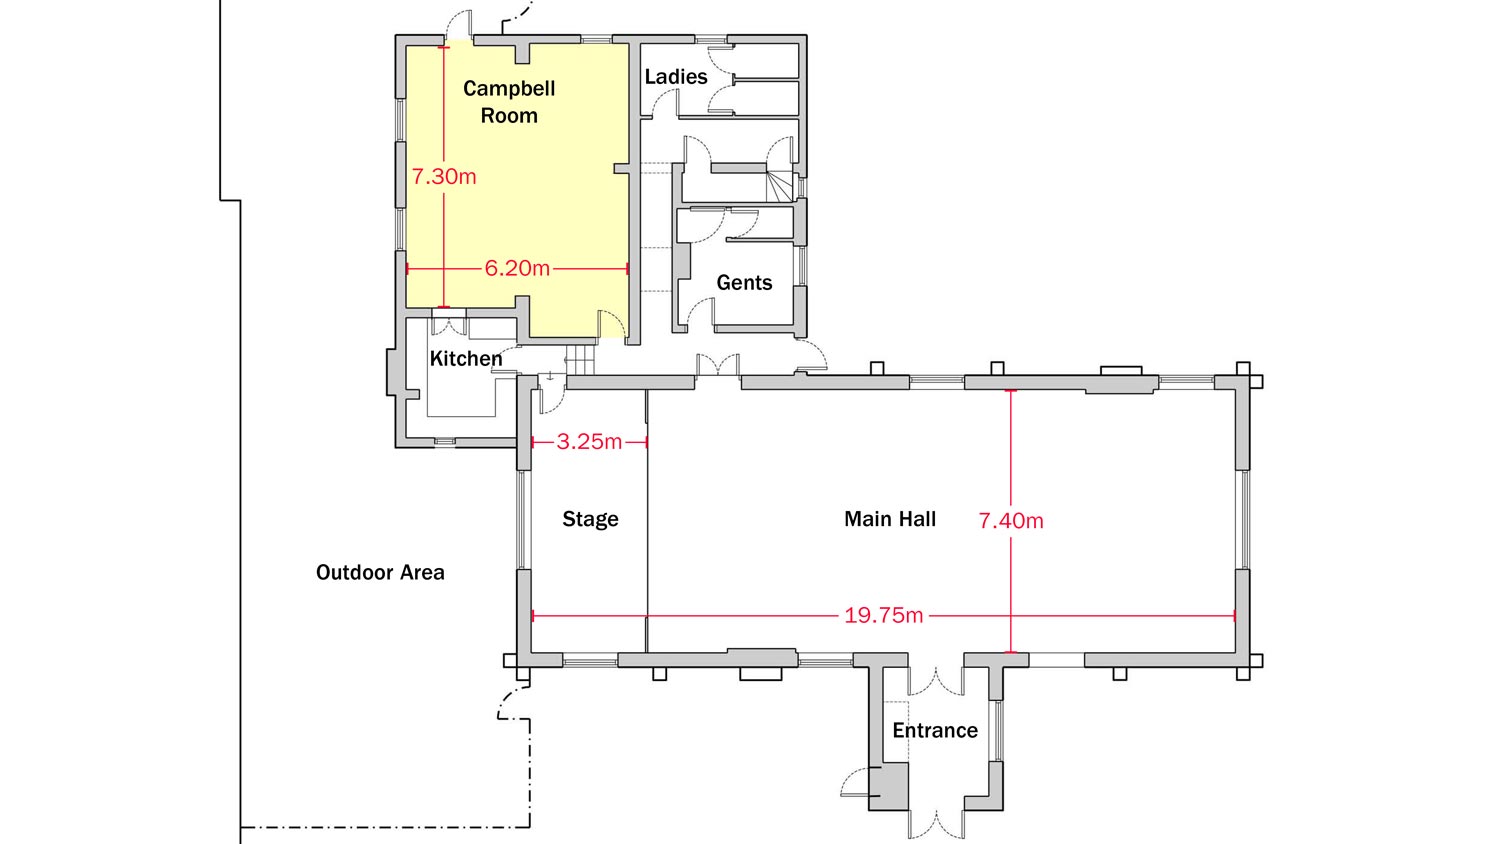 Plan of Dumbleton Village Hall with dimensions